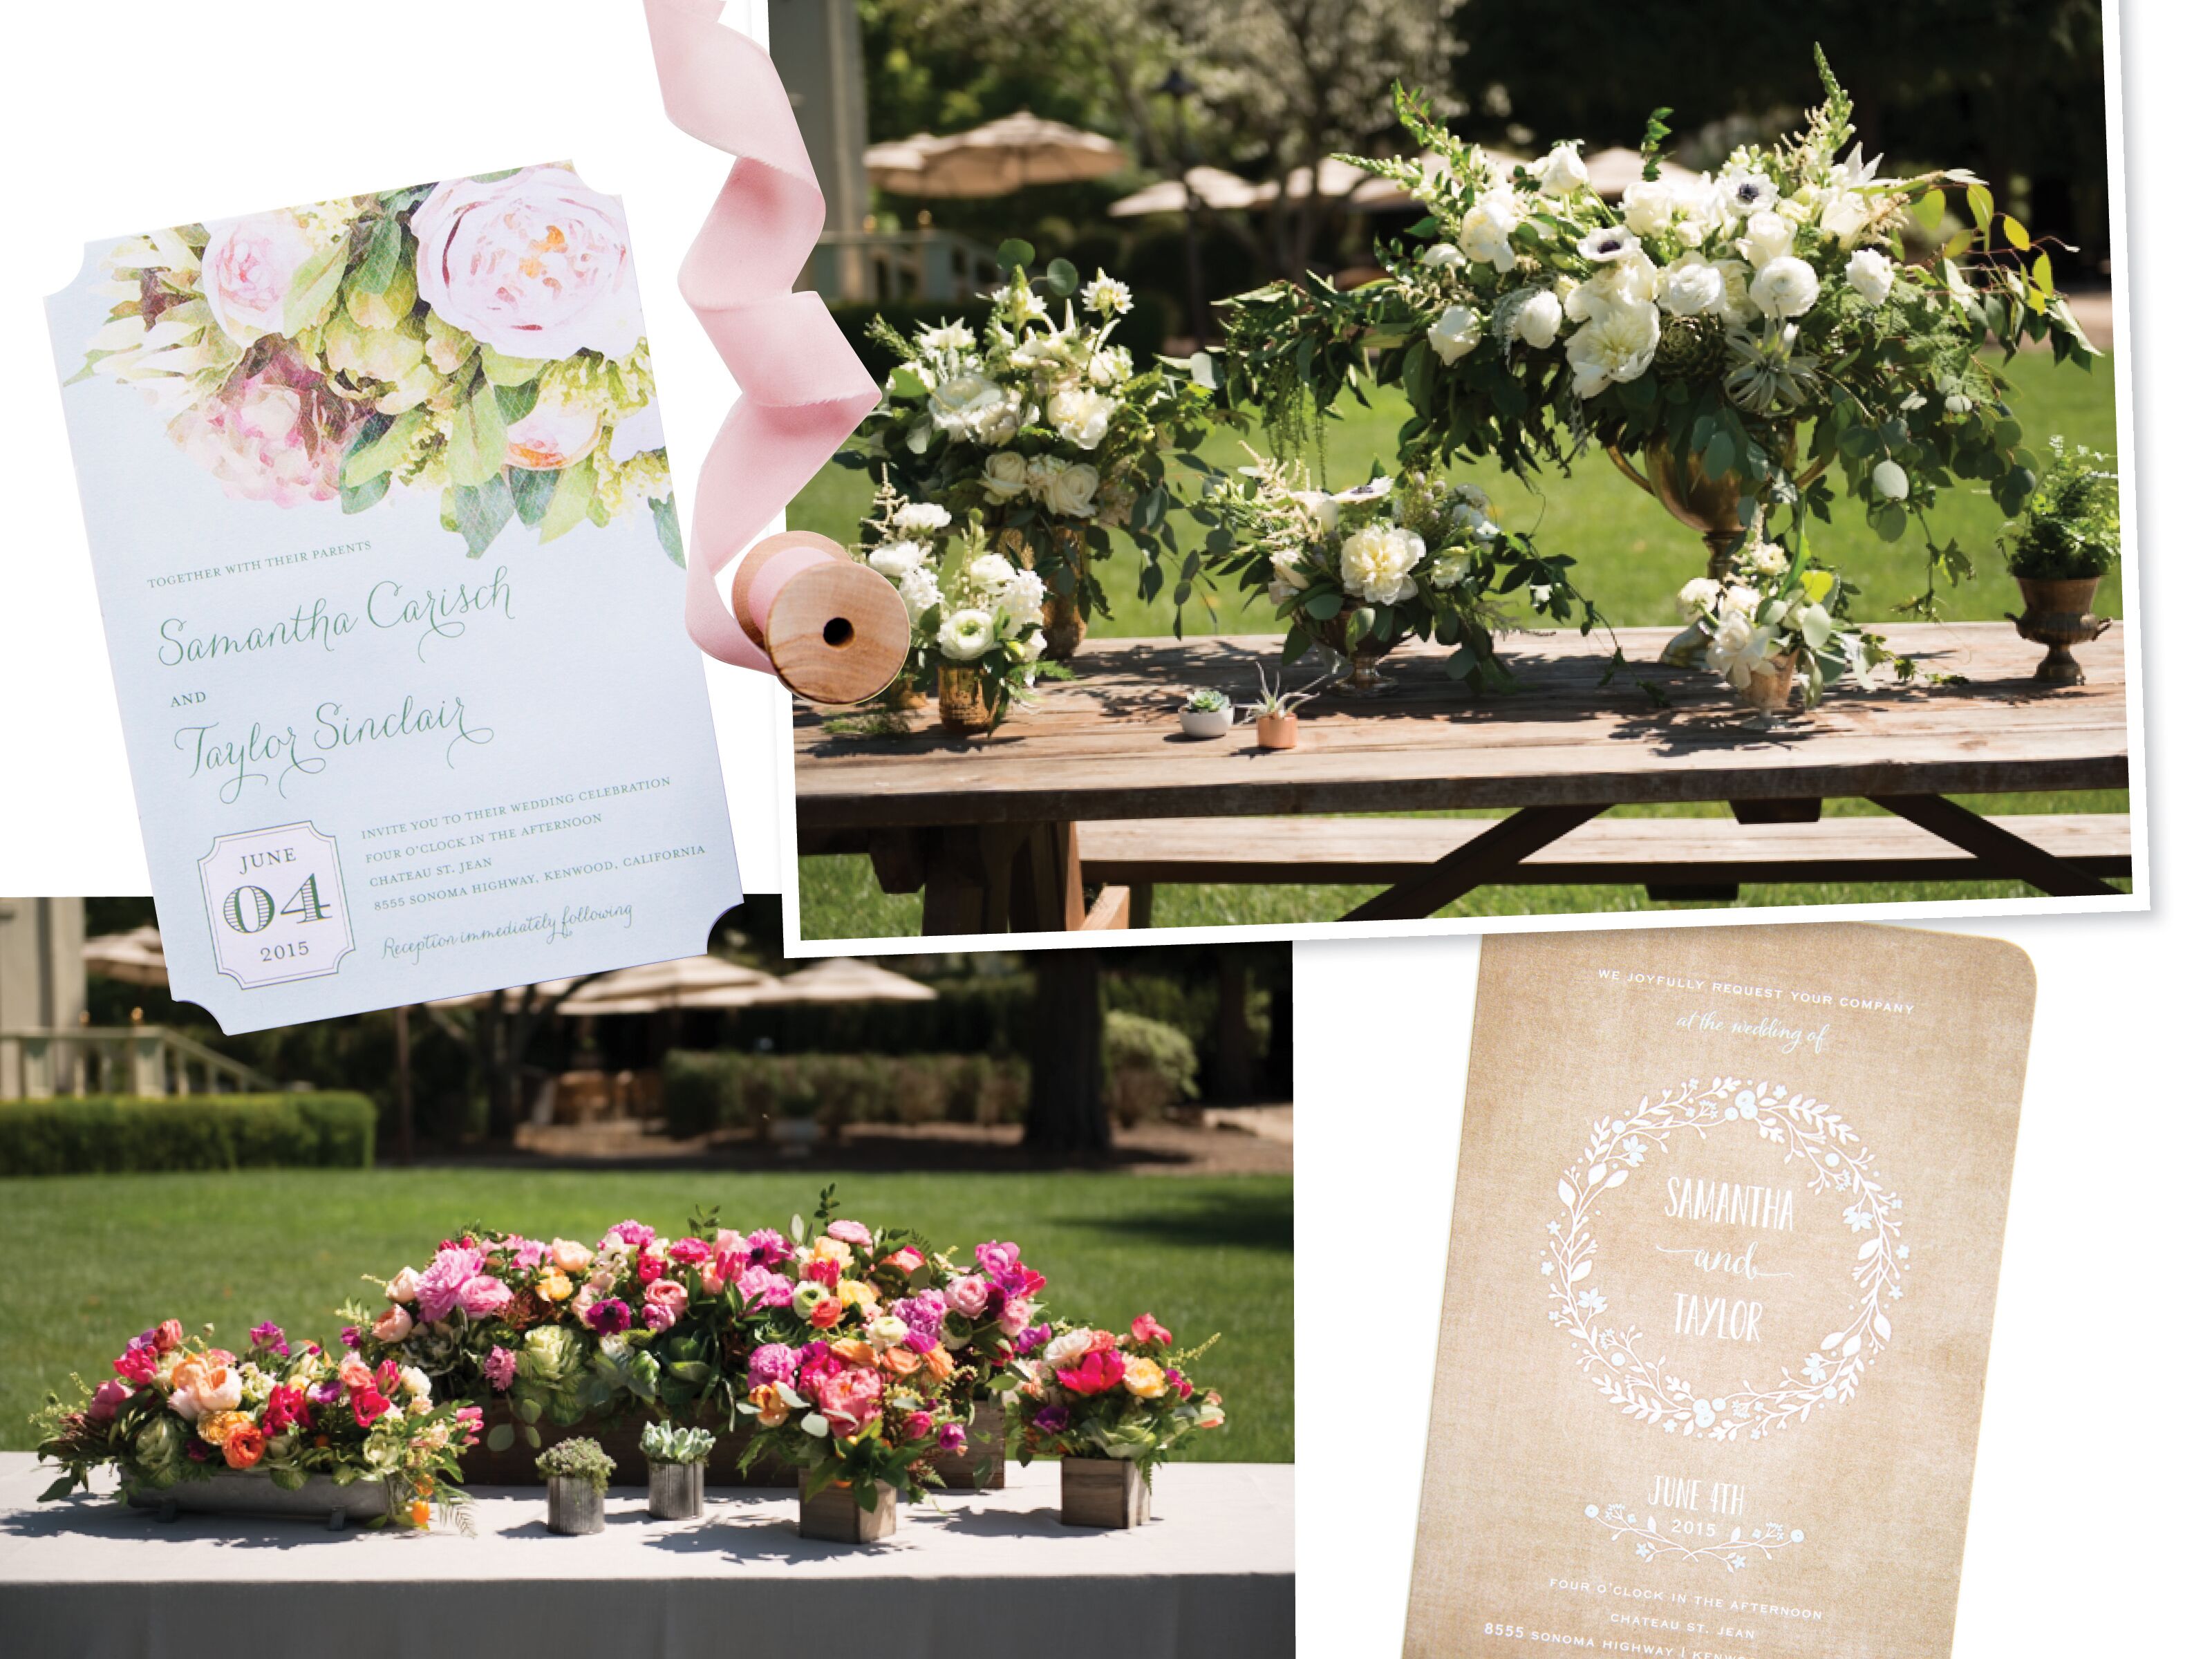 Vote For The Knot Dream Wedding Flowers and Stationery!